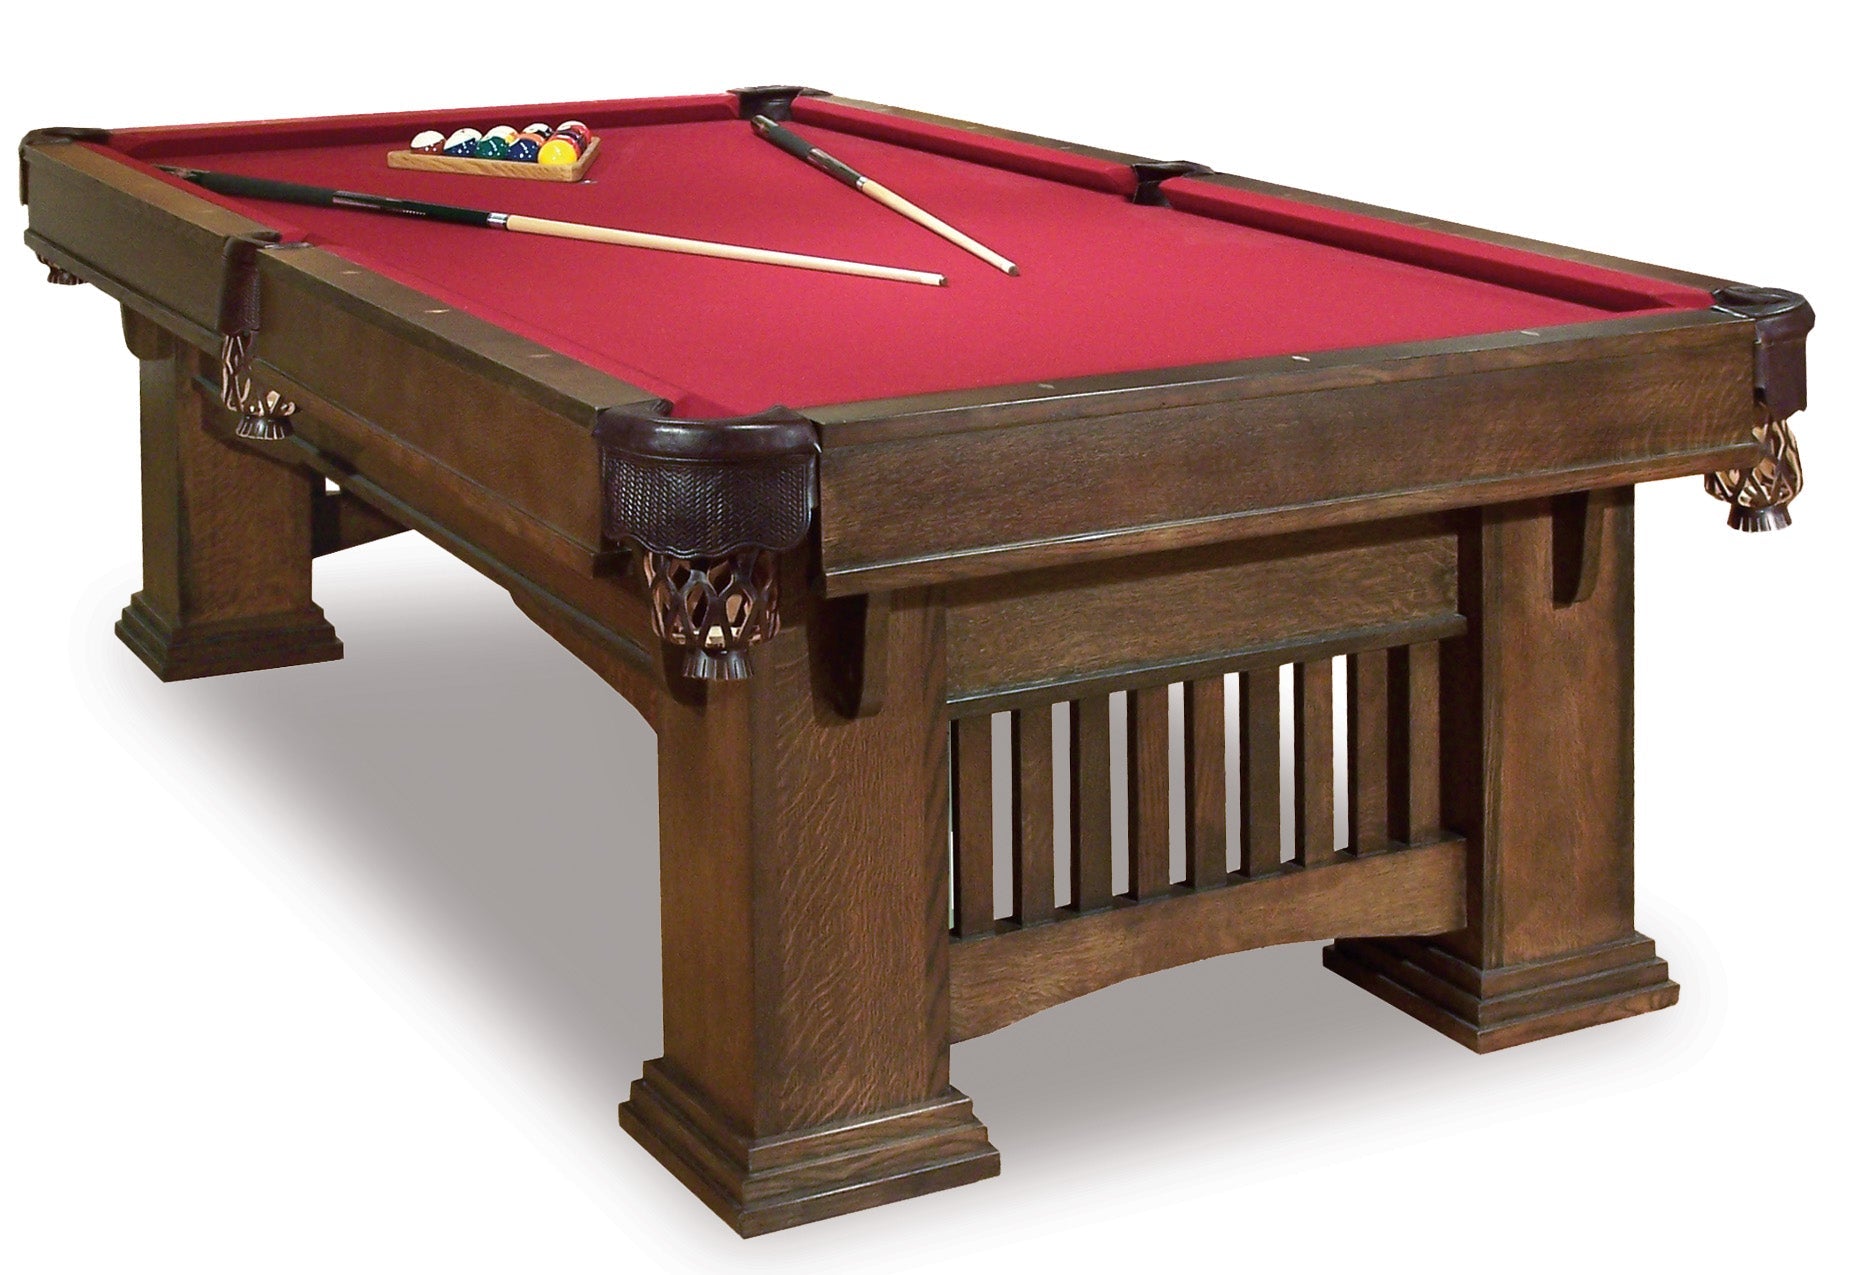 8' Hand-crafted Classic Mission Pool Table (Cherry)